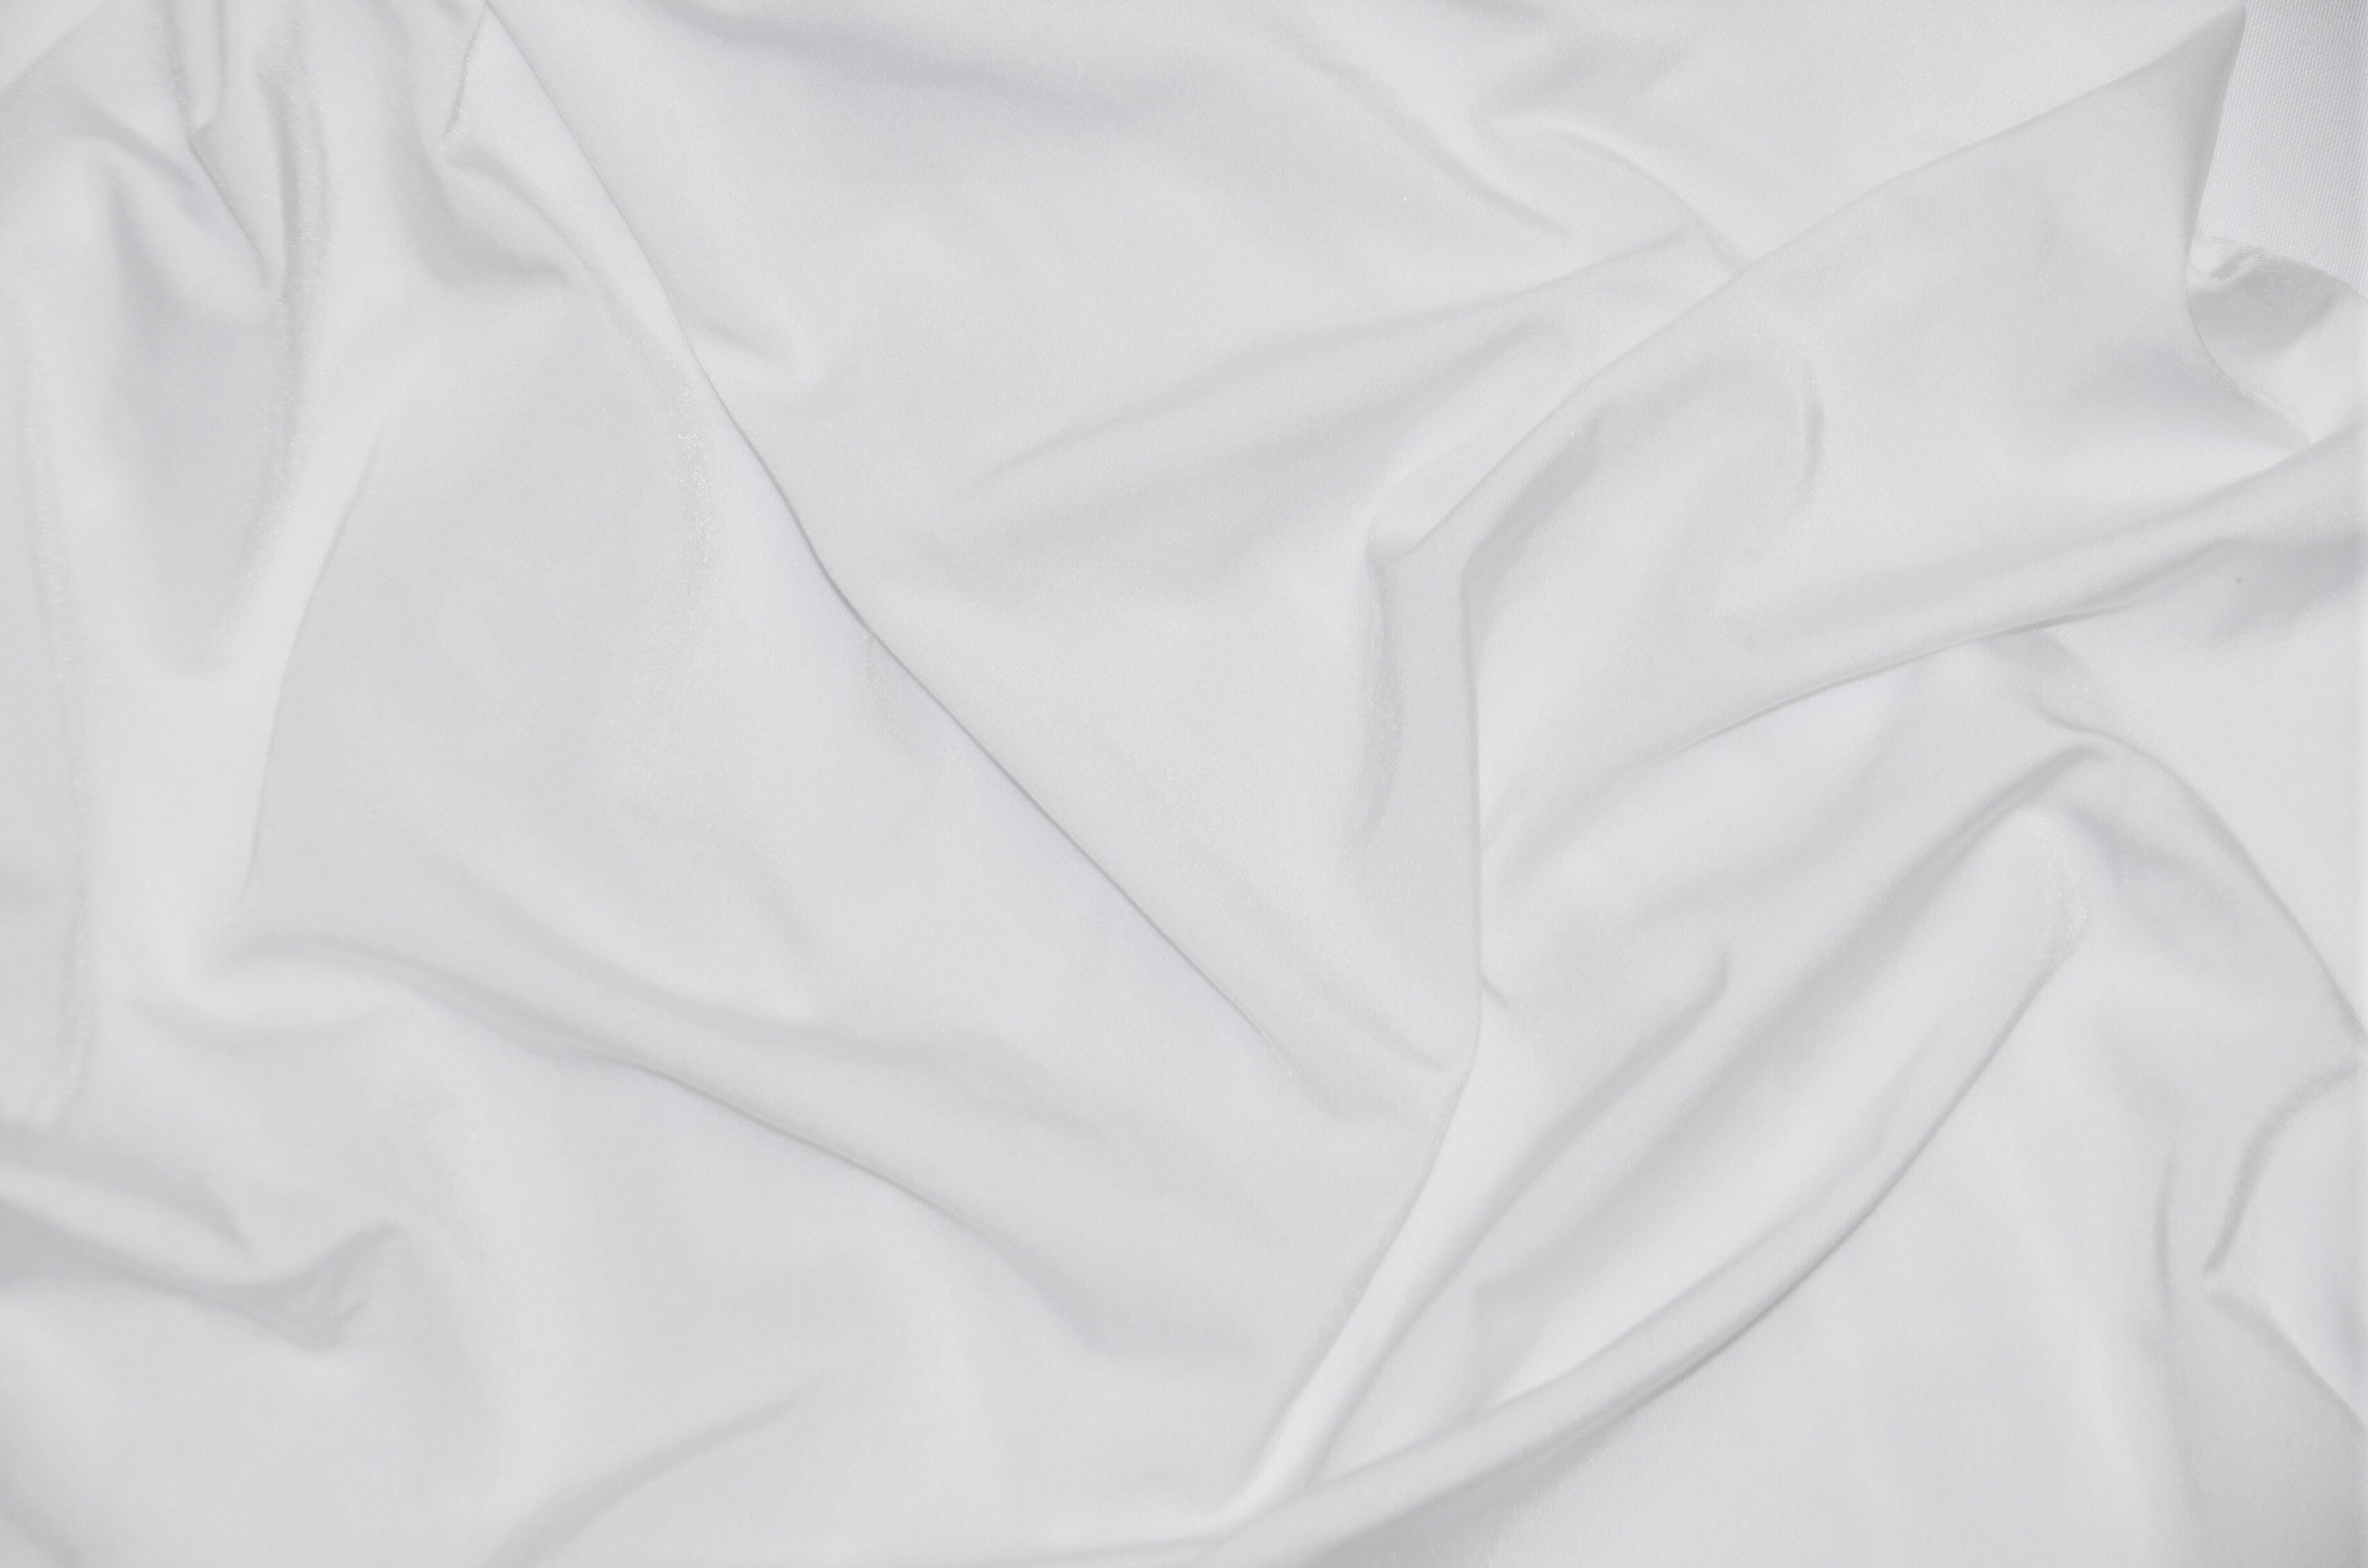 Nylon Spandex 4 Way Stretch Fabric | 60" Width | Great for Swimwear, Dancewear, Waterproof, Tablecloths, Chair Covers | Multiple Colors | Fabric mytextilefabric Yards White 